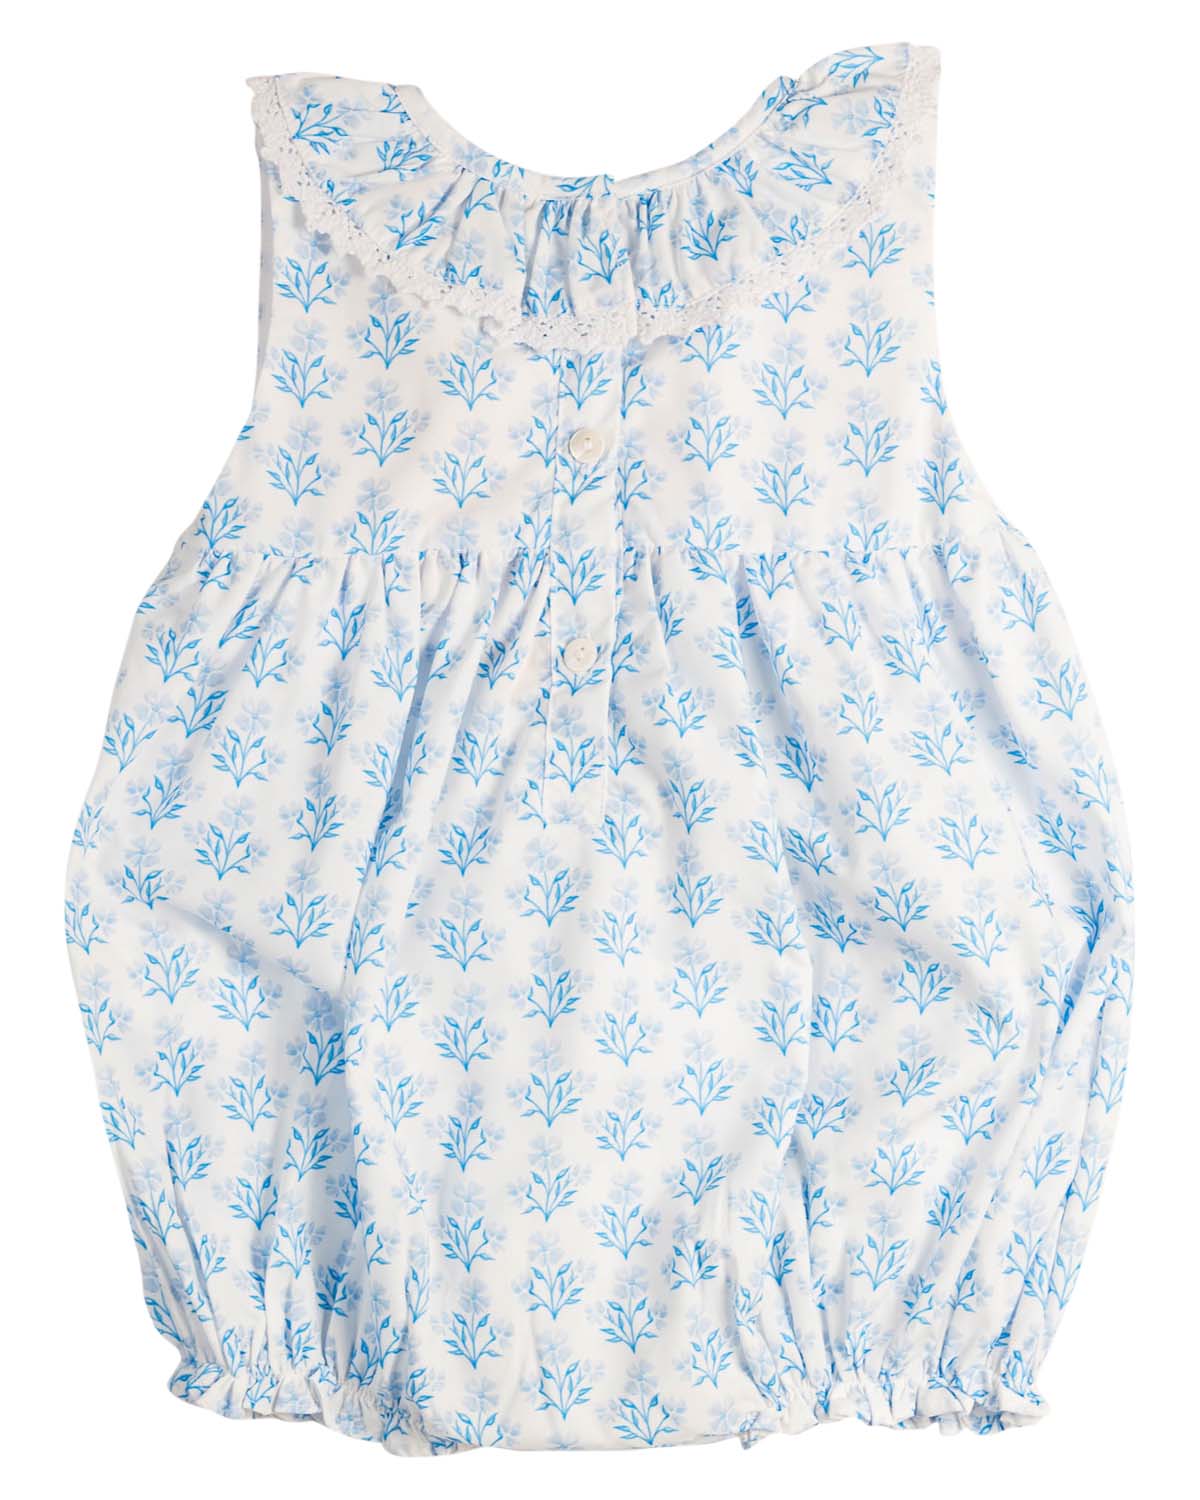 Blue Floral Fields Smocked Bubble with Ruffle Collar